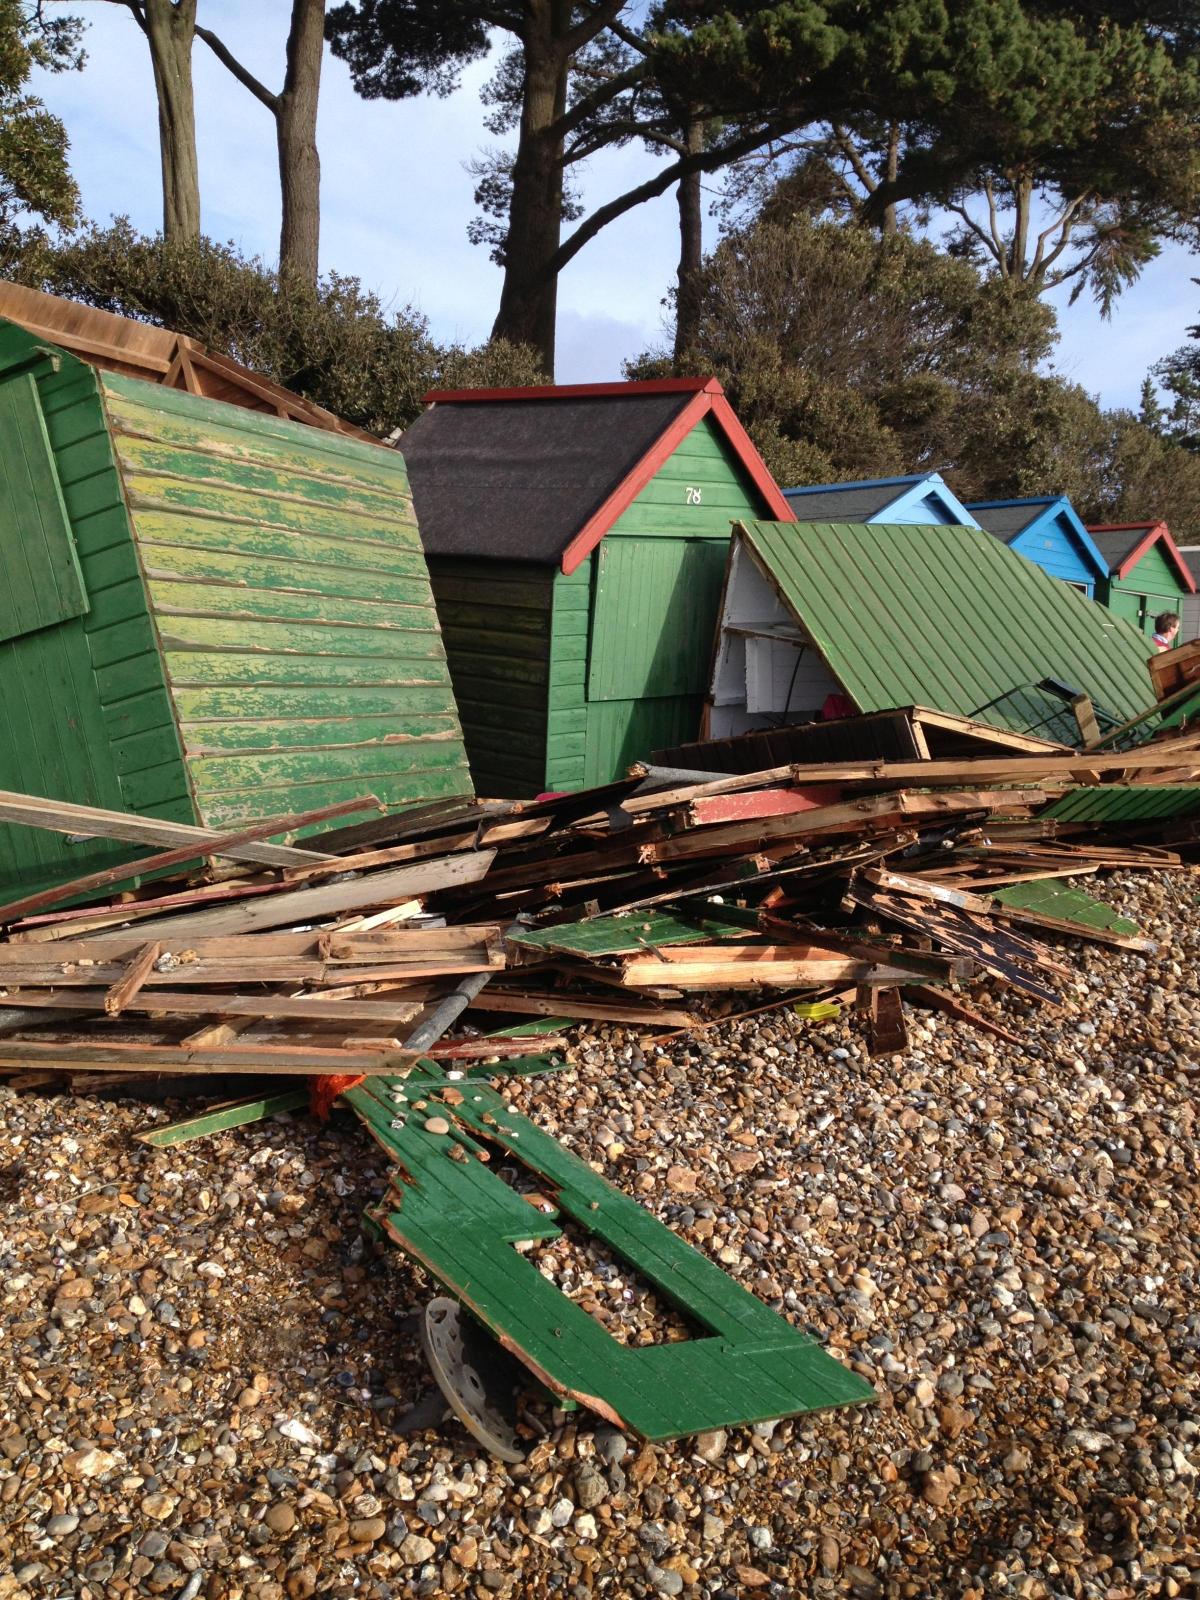 Daily Echo reader photos of the storm and damage left behind after severe weather swept through Dorset on February 14 and February 15. Picture taken by Debbie Durrant at Avon Beach